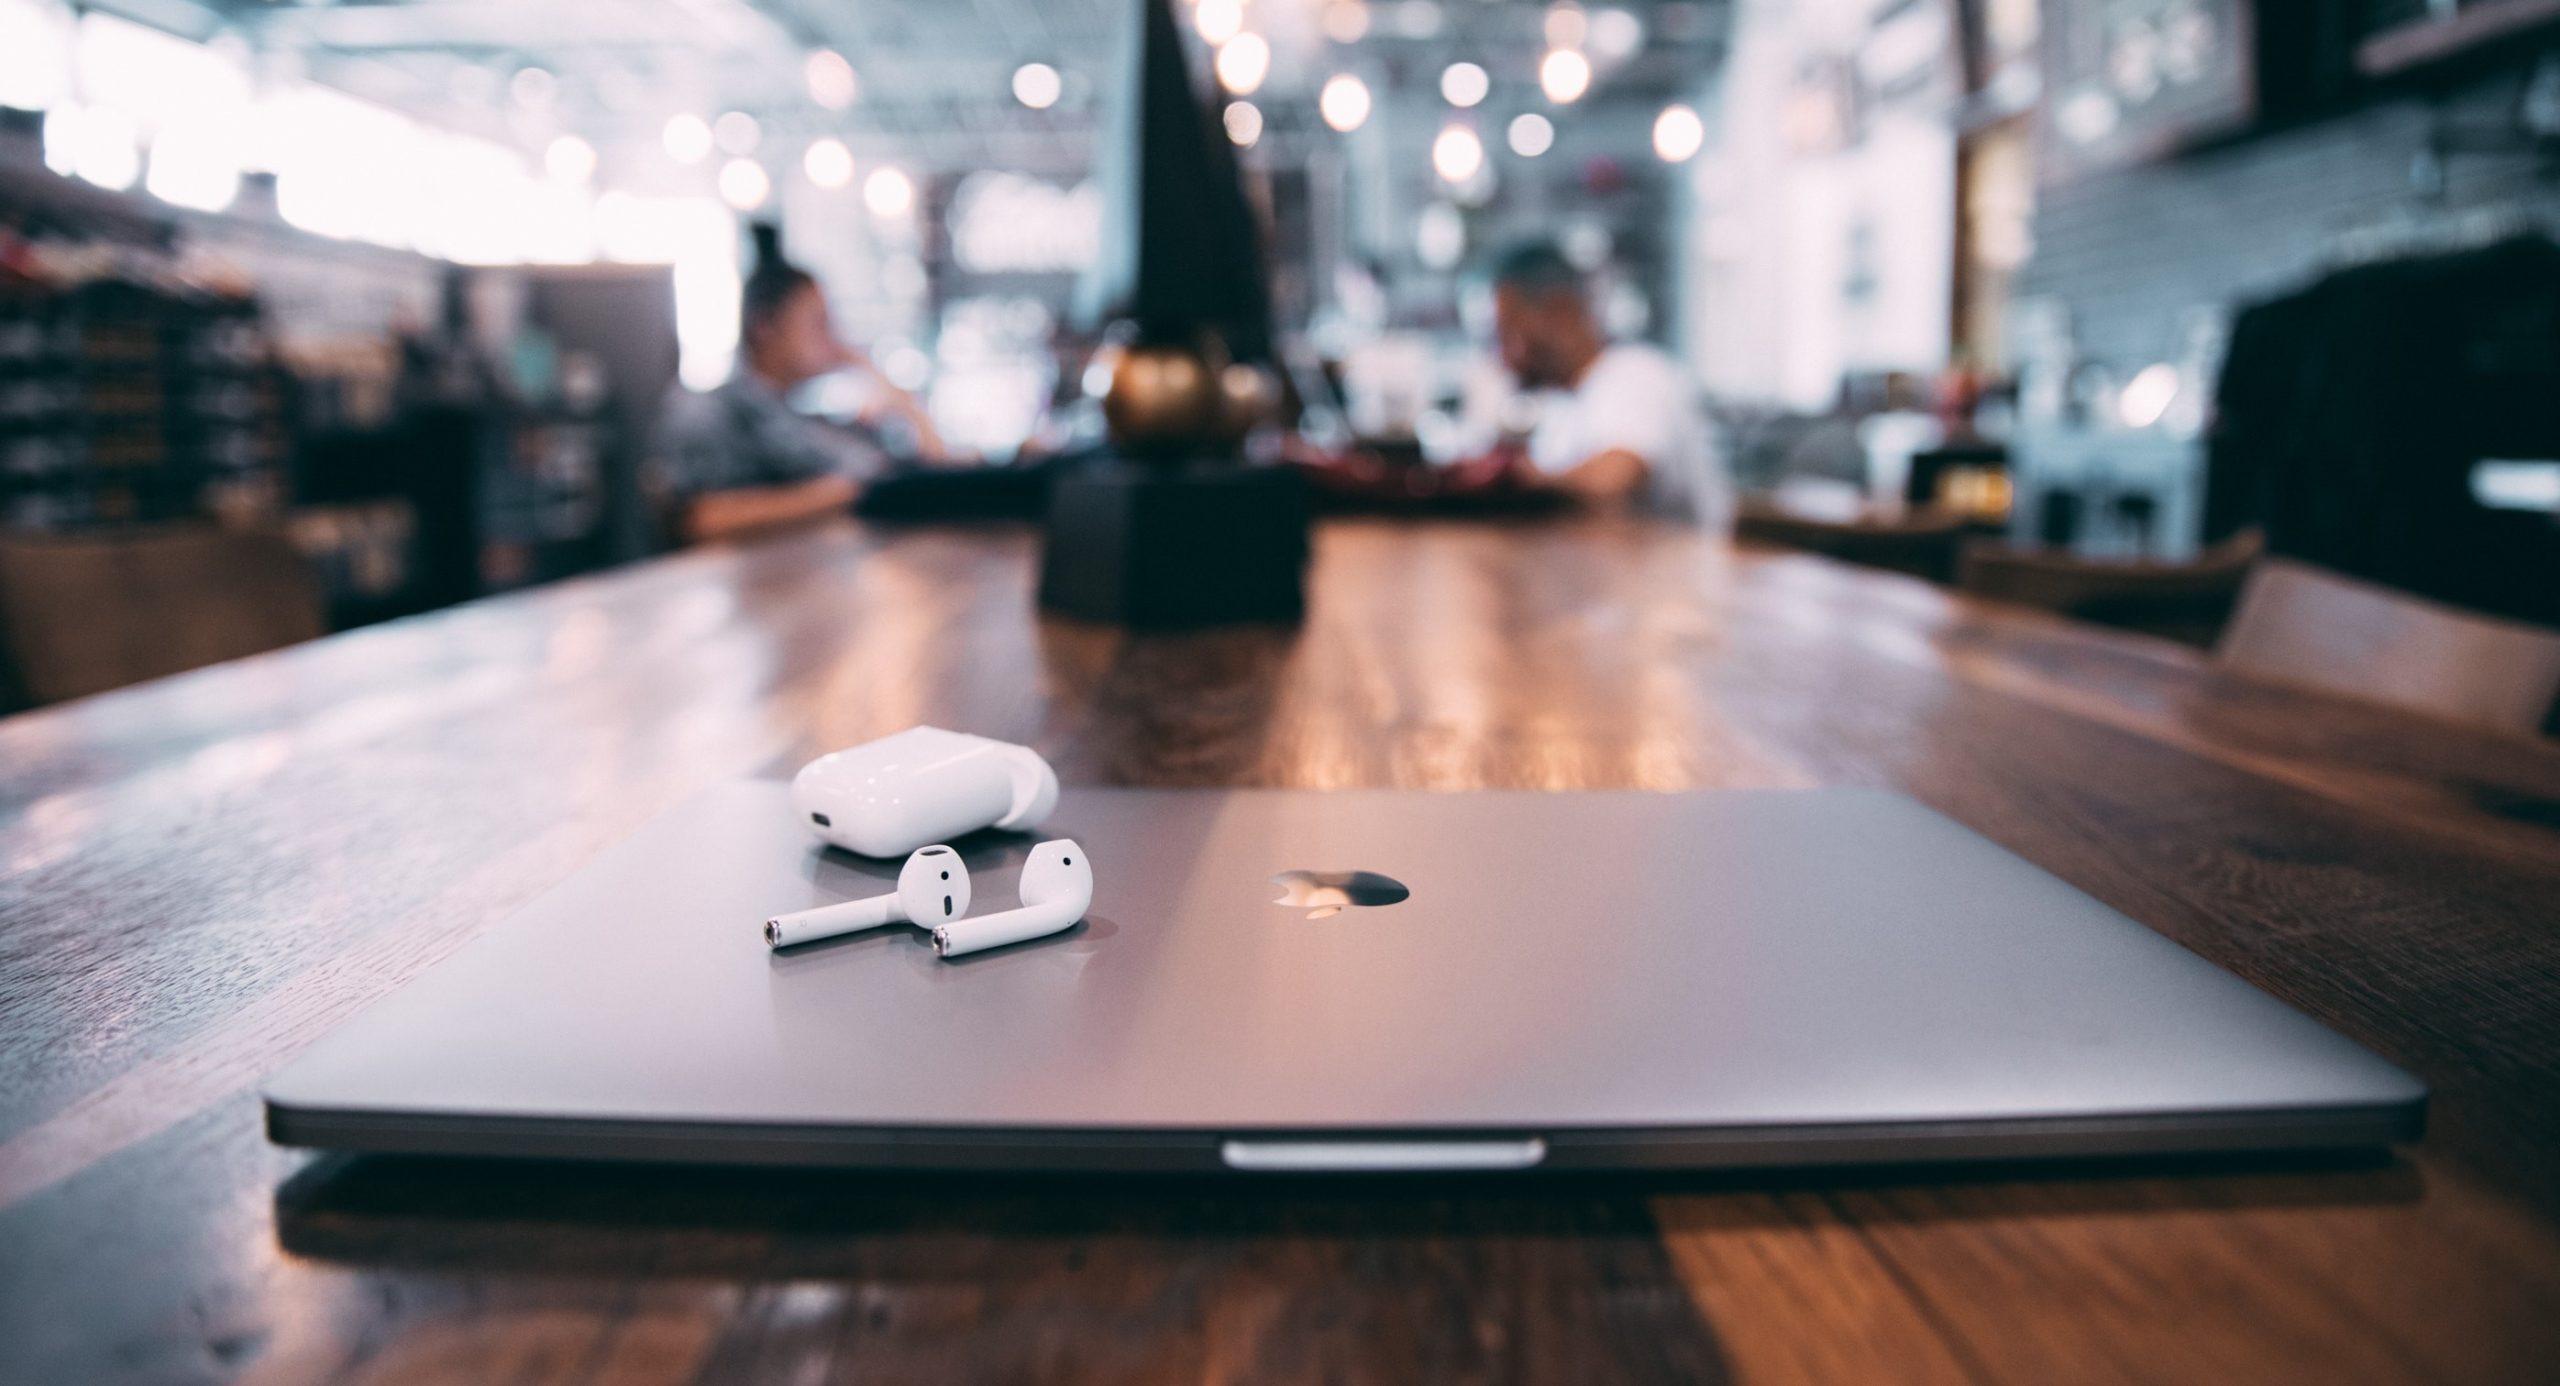 Laptop and AirPods placed on a wooden table against a blurred background.